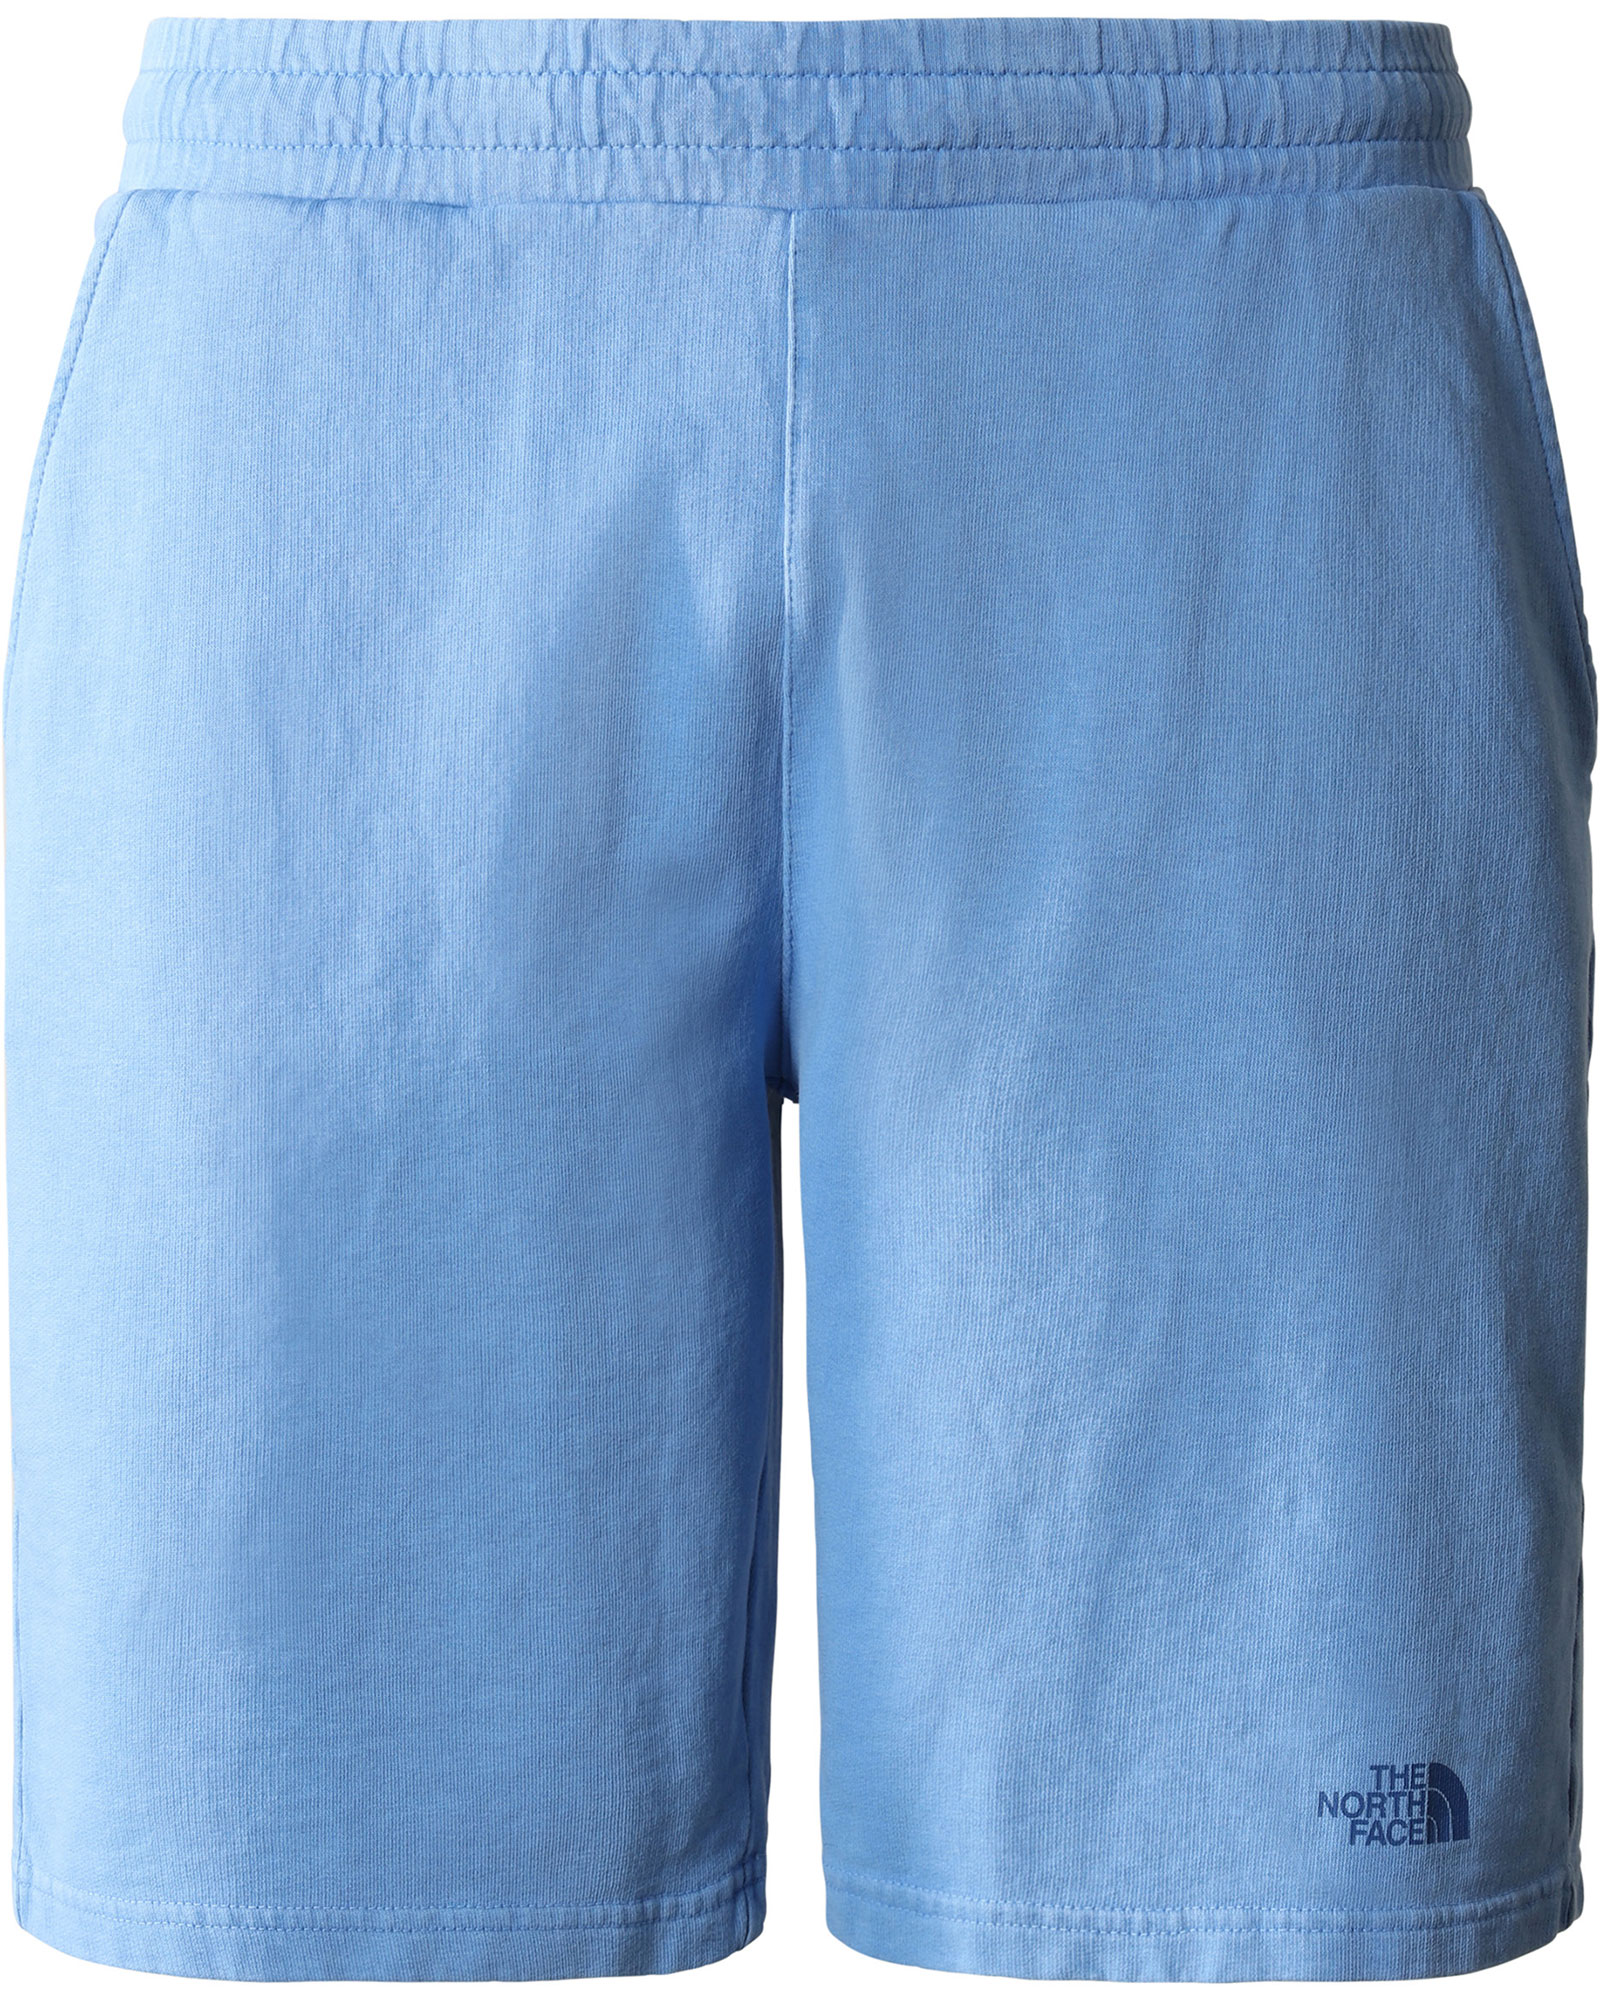 The North Face Men’s Heritage Dye Pack Shorts - Super Sonic Blue M